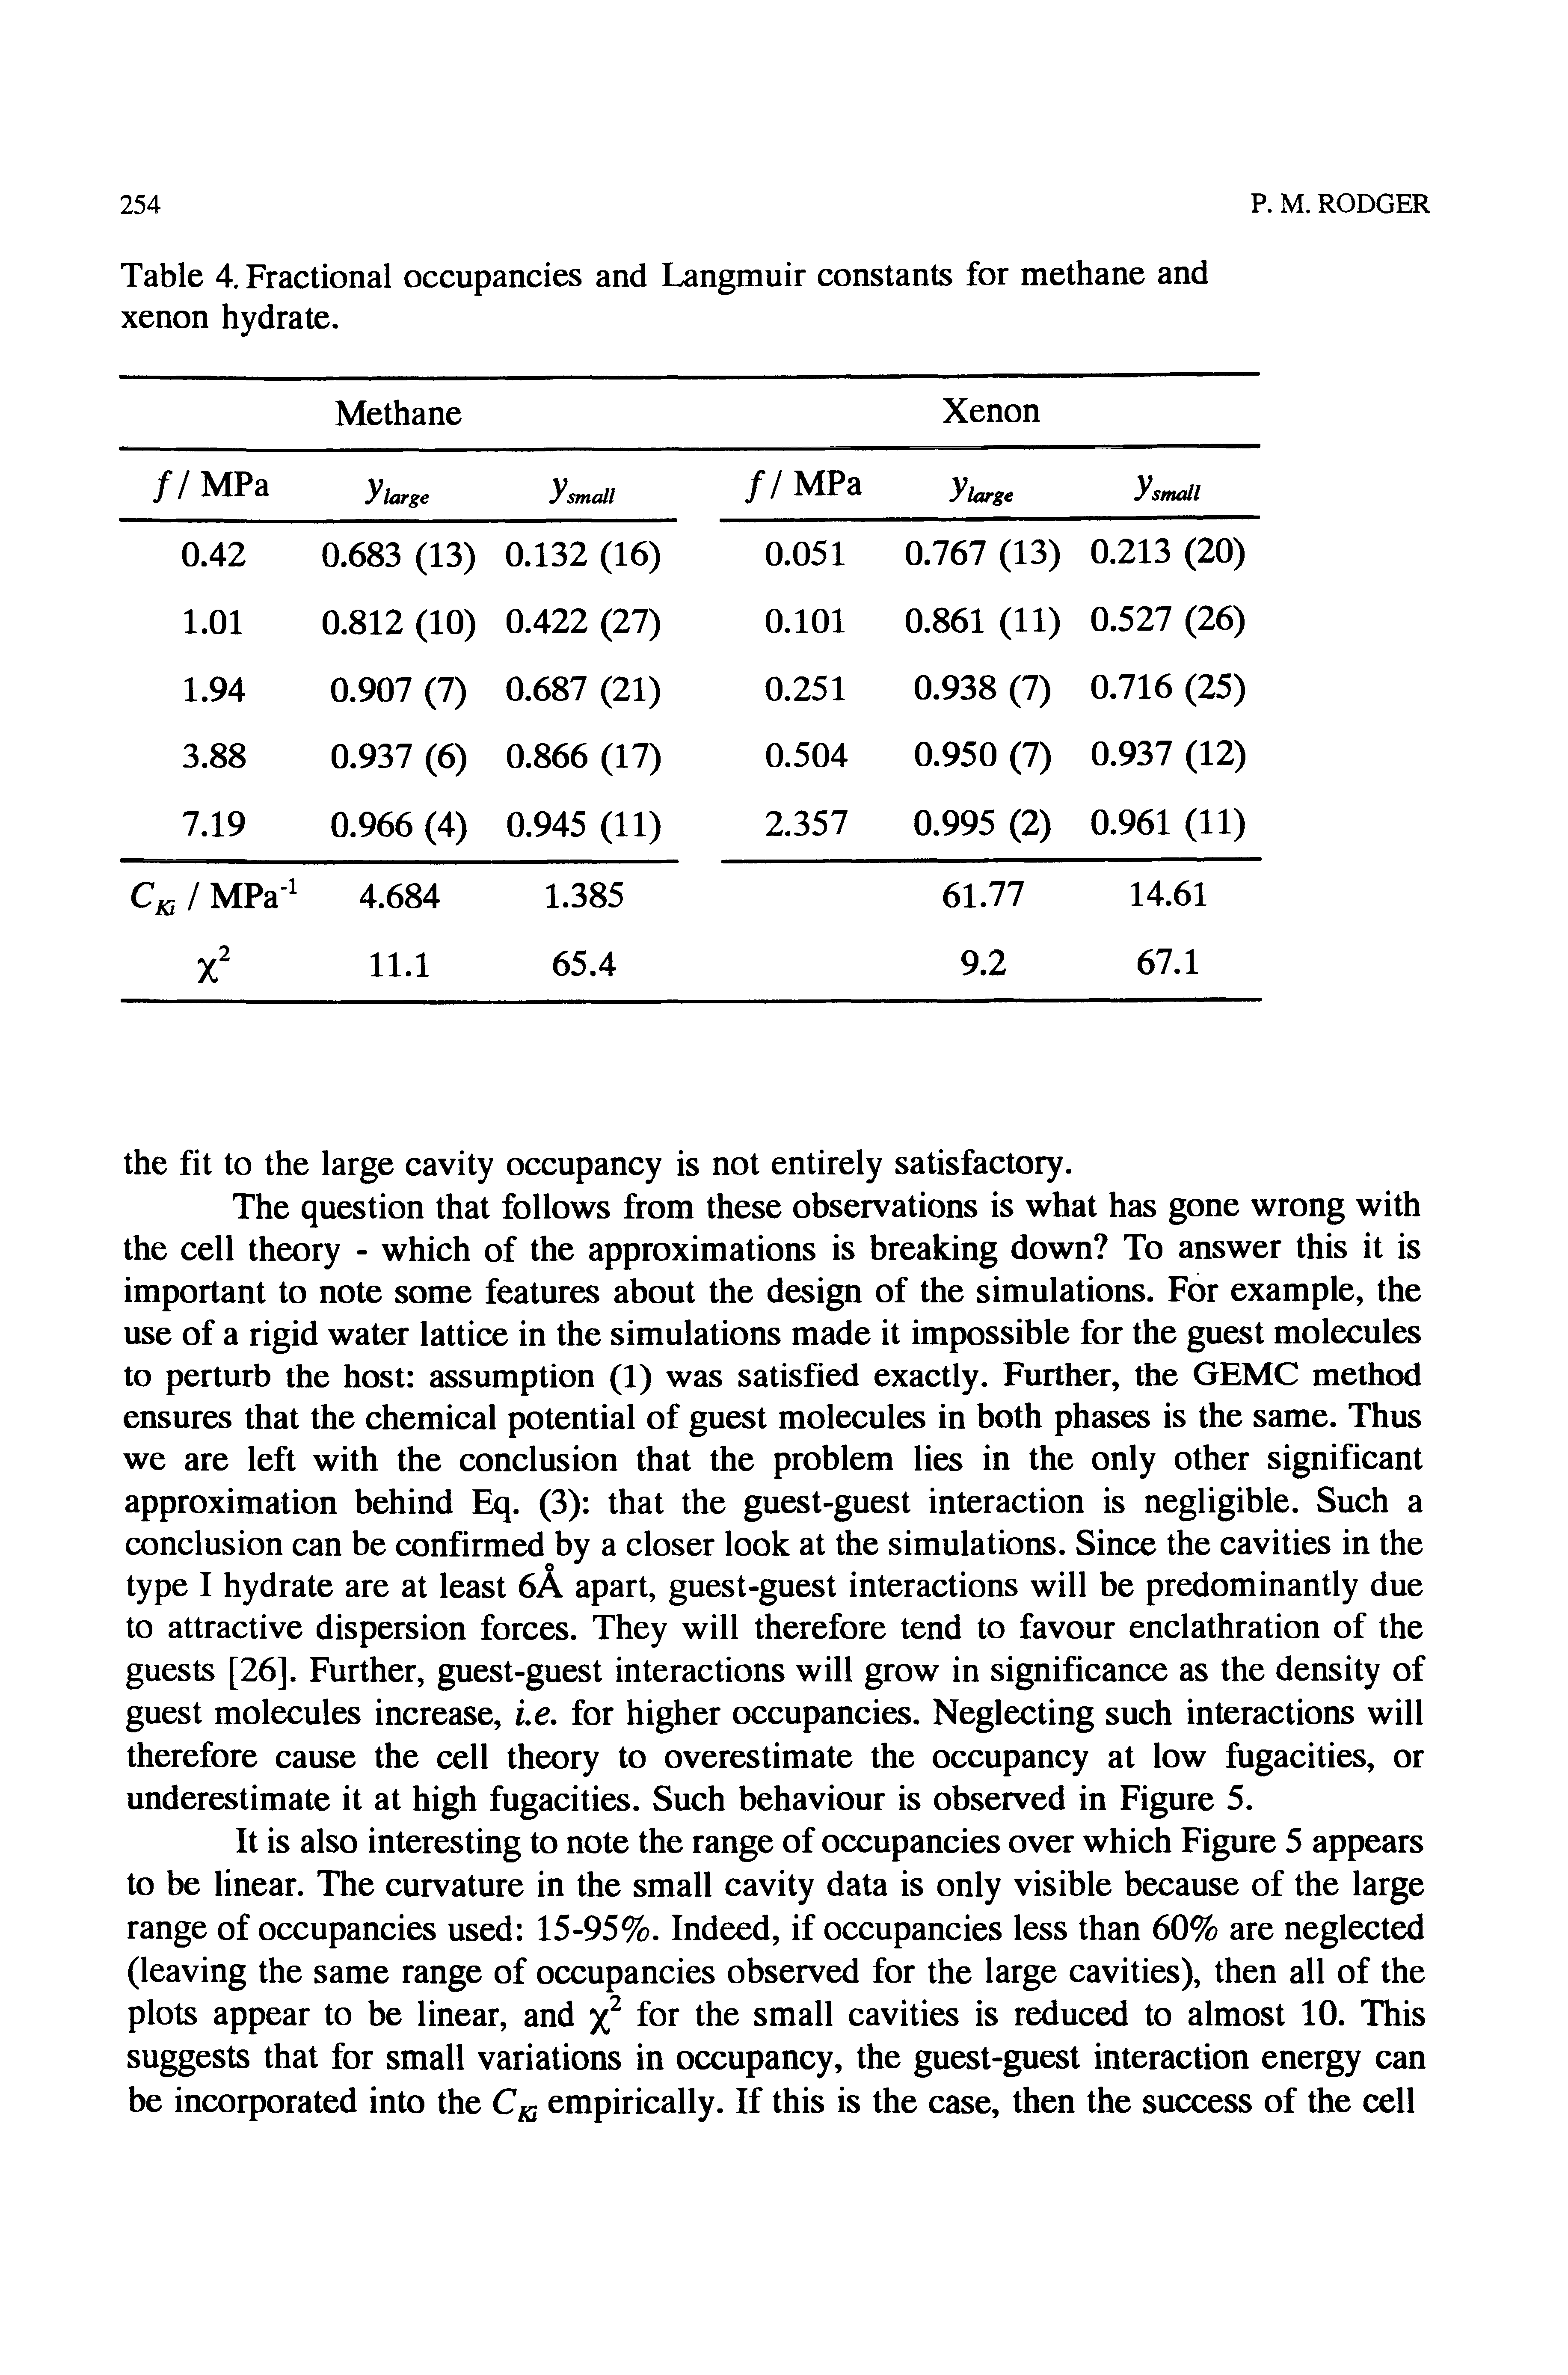 Table 4. Fractional occupancies and Langmuir constants for methane and xenon hydrate.